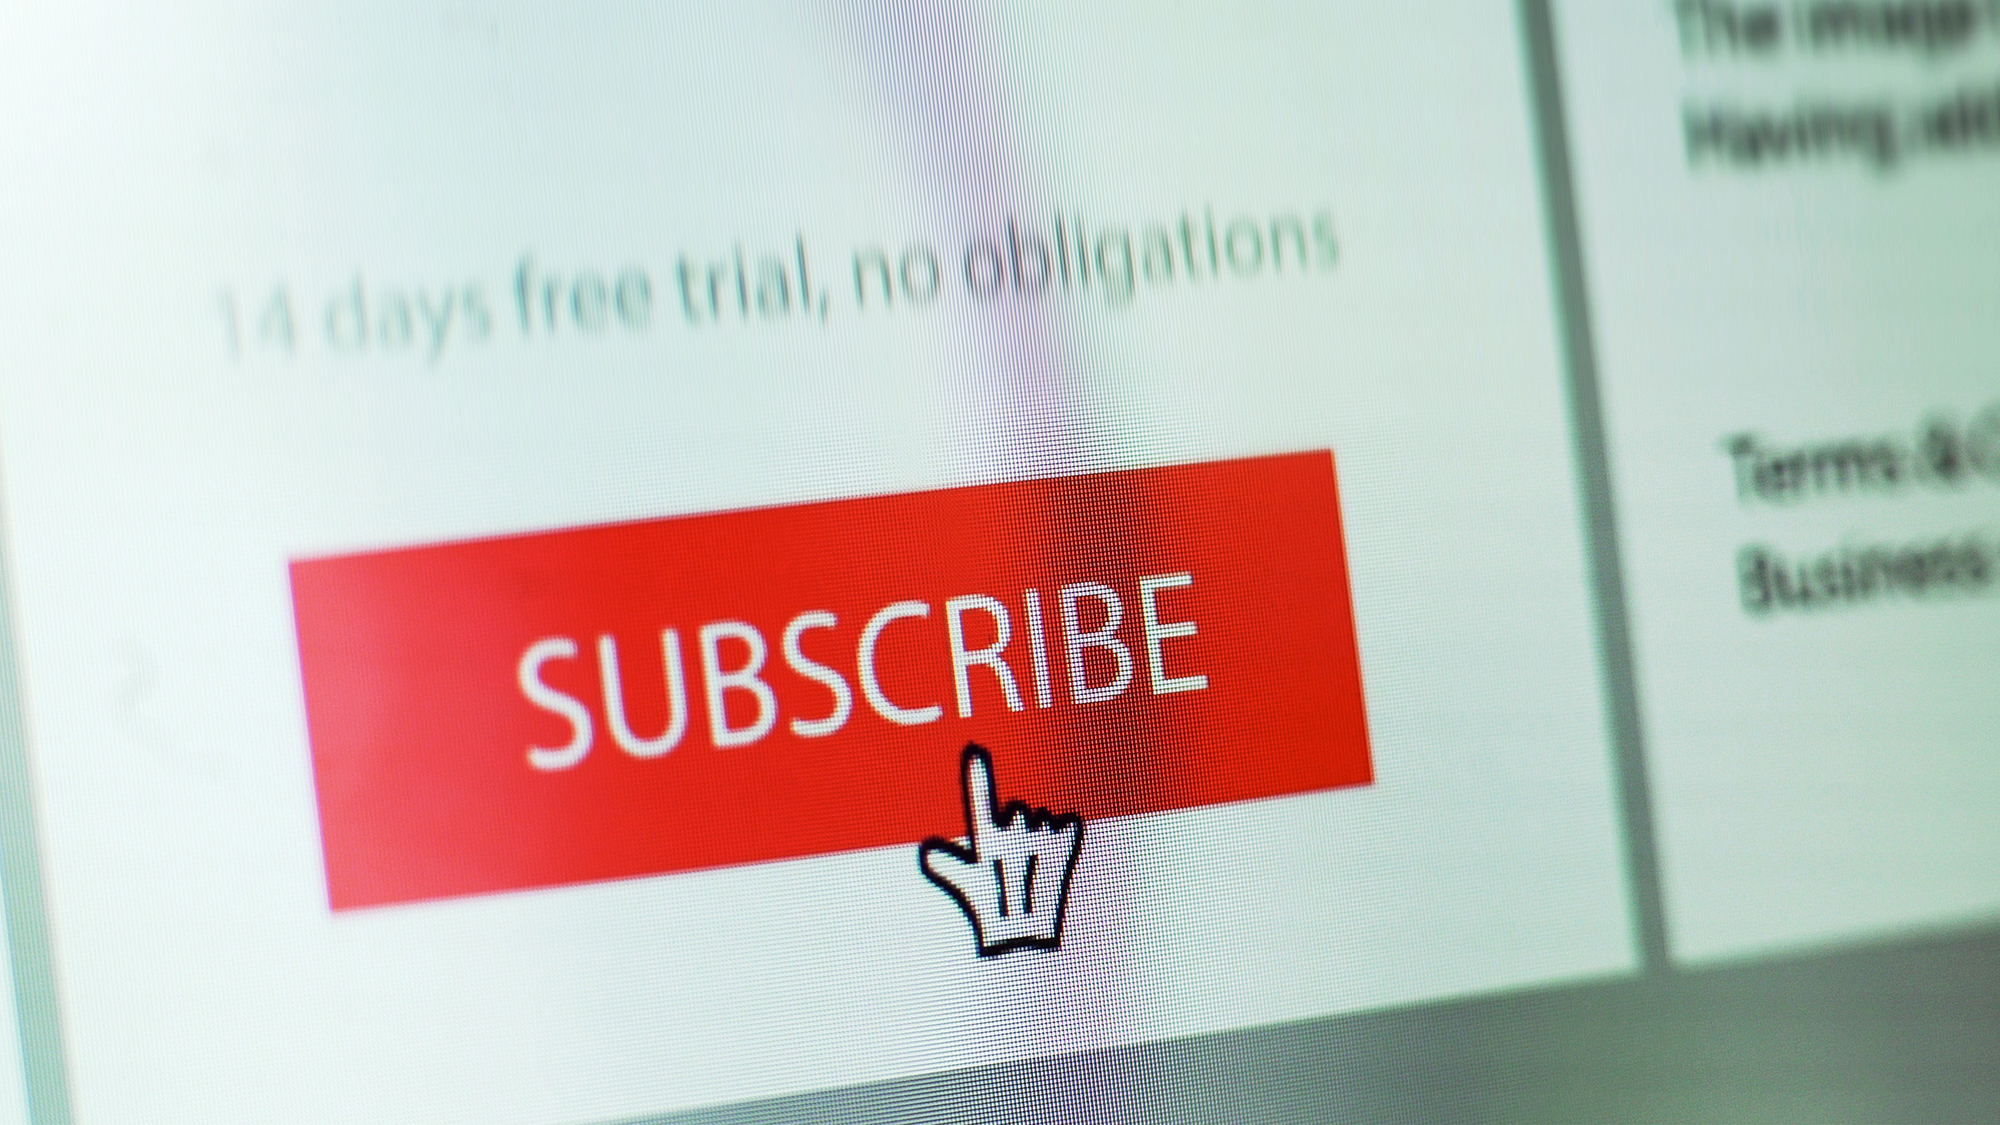 How to Build a Subscriber Service